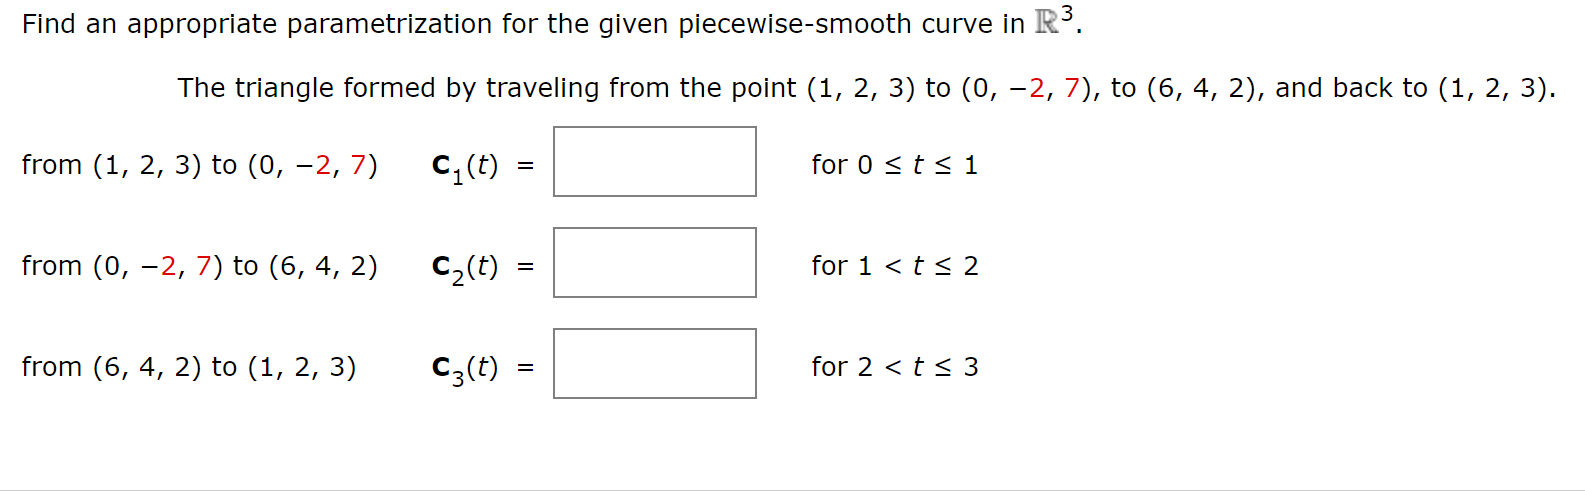 Find an appropriate parametrization for the given piecewise-smooth curve in R'.
The triangle formed by traveling from the point (1, 2, 3) to (0, -2, 7), to (6, 4, 2), and back to (1, 2, 3).
from (1, 2, 3) to (0, –2, 7)
for 0 < t < 1
c, (t) =
from (0, –2, 7) to (6, 4, 2)
for 1 <t < 2
C2(t)
from (6, 4, 2) to (1, 2, 3)
for 2 < t< 3
C3(t) =
